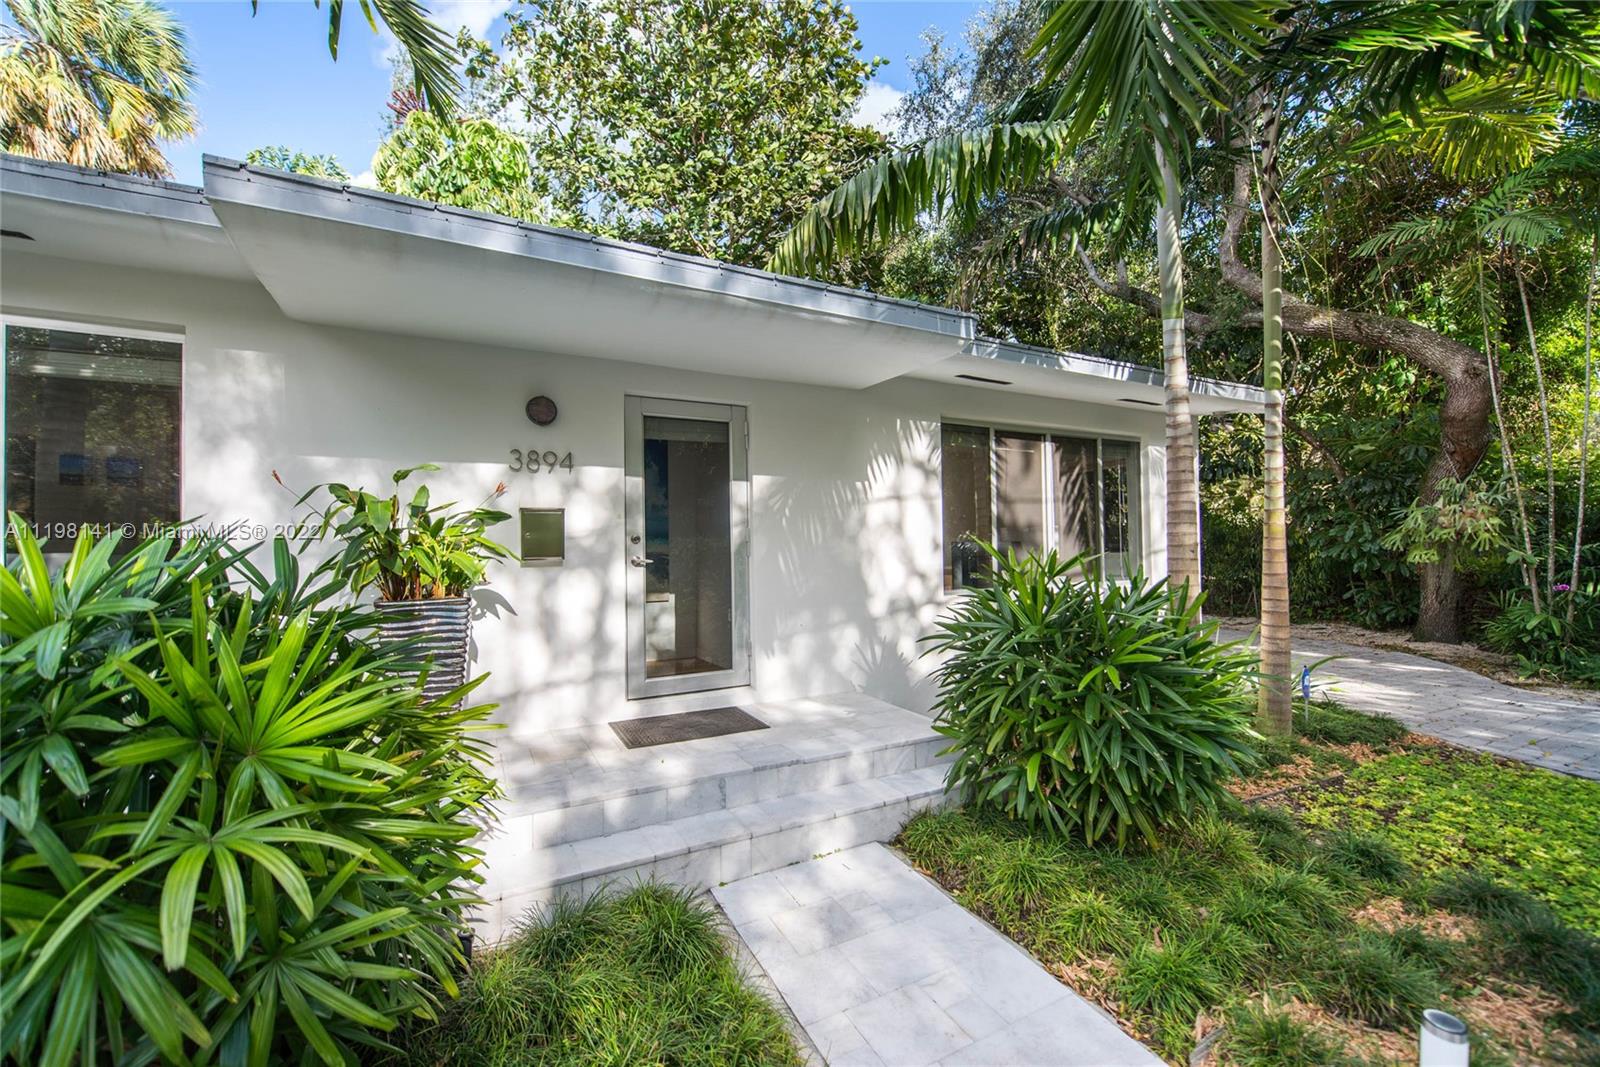 Lovely home on a great street in lush, tree-canopied S. Coconut Grove. Walk to the Grove villages galleries, boutiques, cafes and bayfront parks & marinas. Totally renovated and expanded in 2013 includes new roof & impact glass throughout. Light-filled living spaces w/ wood floors and 10 ft ceilings, overlook the covered patio for year-round outdoor entertaining. Large master suite has walk-in closet, modern-style bath w/oversized shower and French doors opening to the garden. Euro-style kitchen features Italian teak cabinetry, stainless steel counter-tops & breakfast bar. Light-filled family room w/ wood floors & 10 ft ceilings, overlooks the covered patio for outdoor entertaining. Not in a flood zone. Just mins to highly rated schools & to shopping & dining in South Miami & Coral Gables.